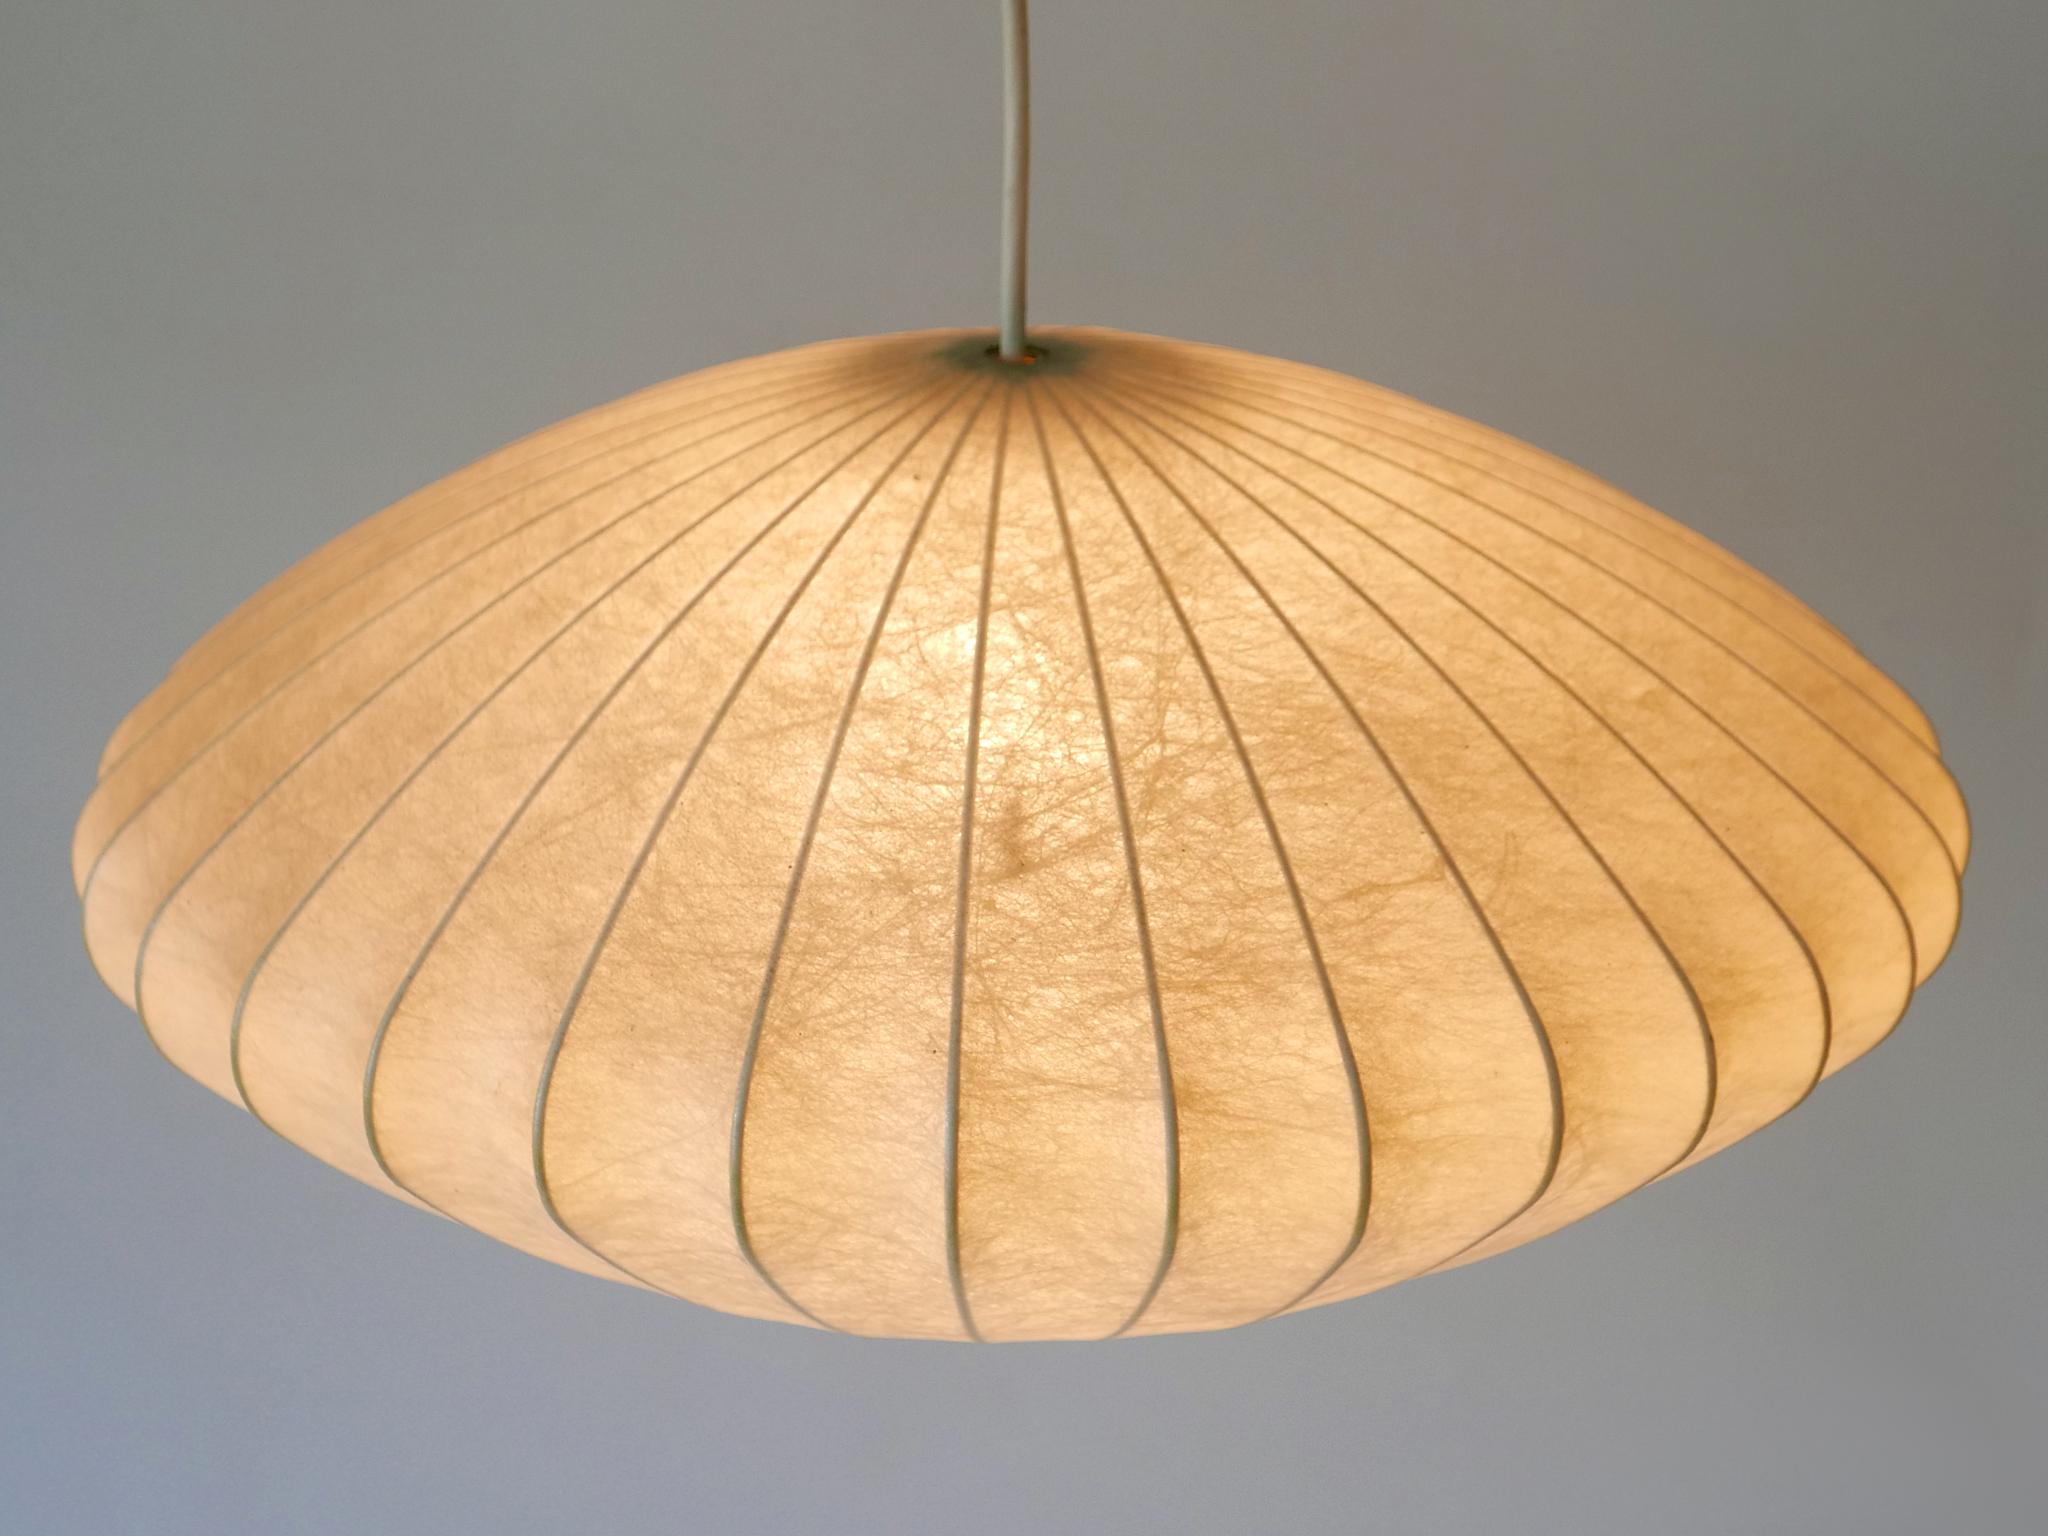 Rare Mid-Century Modern Cocoon Pendant Lamp or Hanging Light by Goldkant 1960s For Sale 10